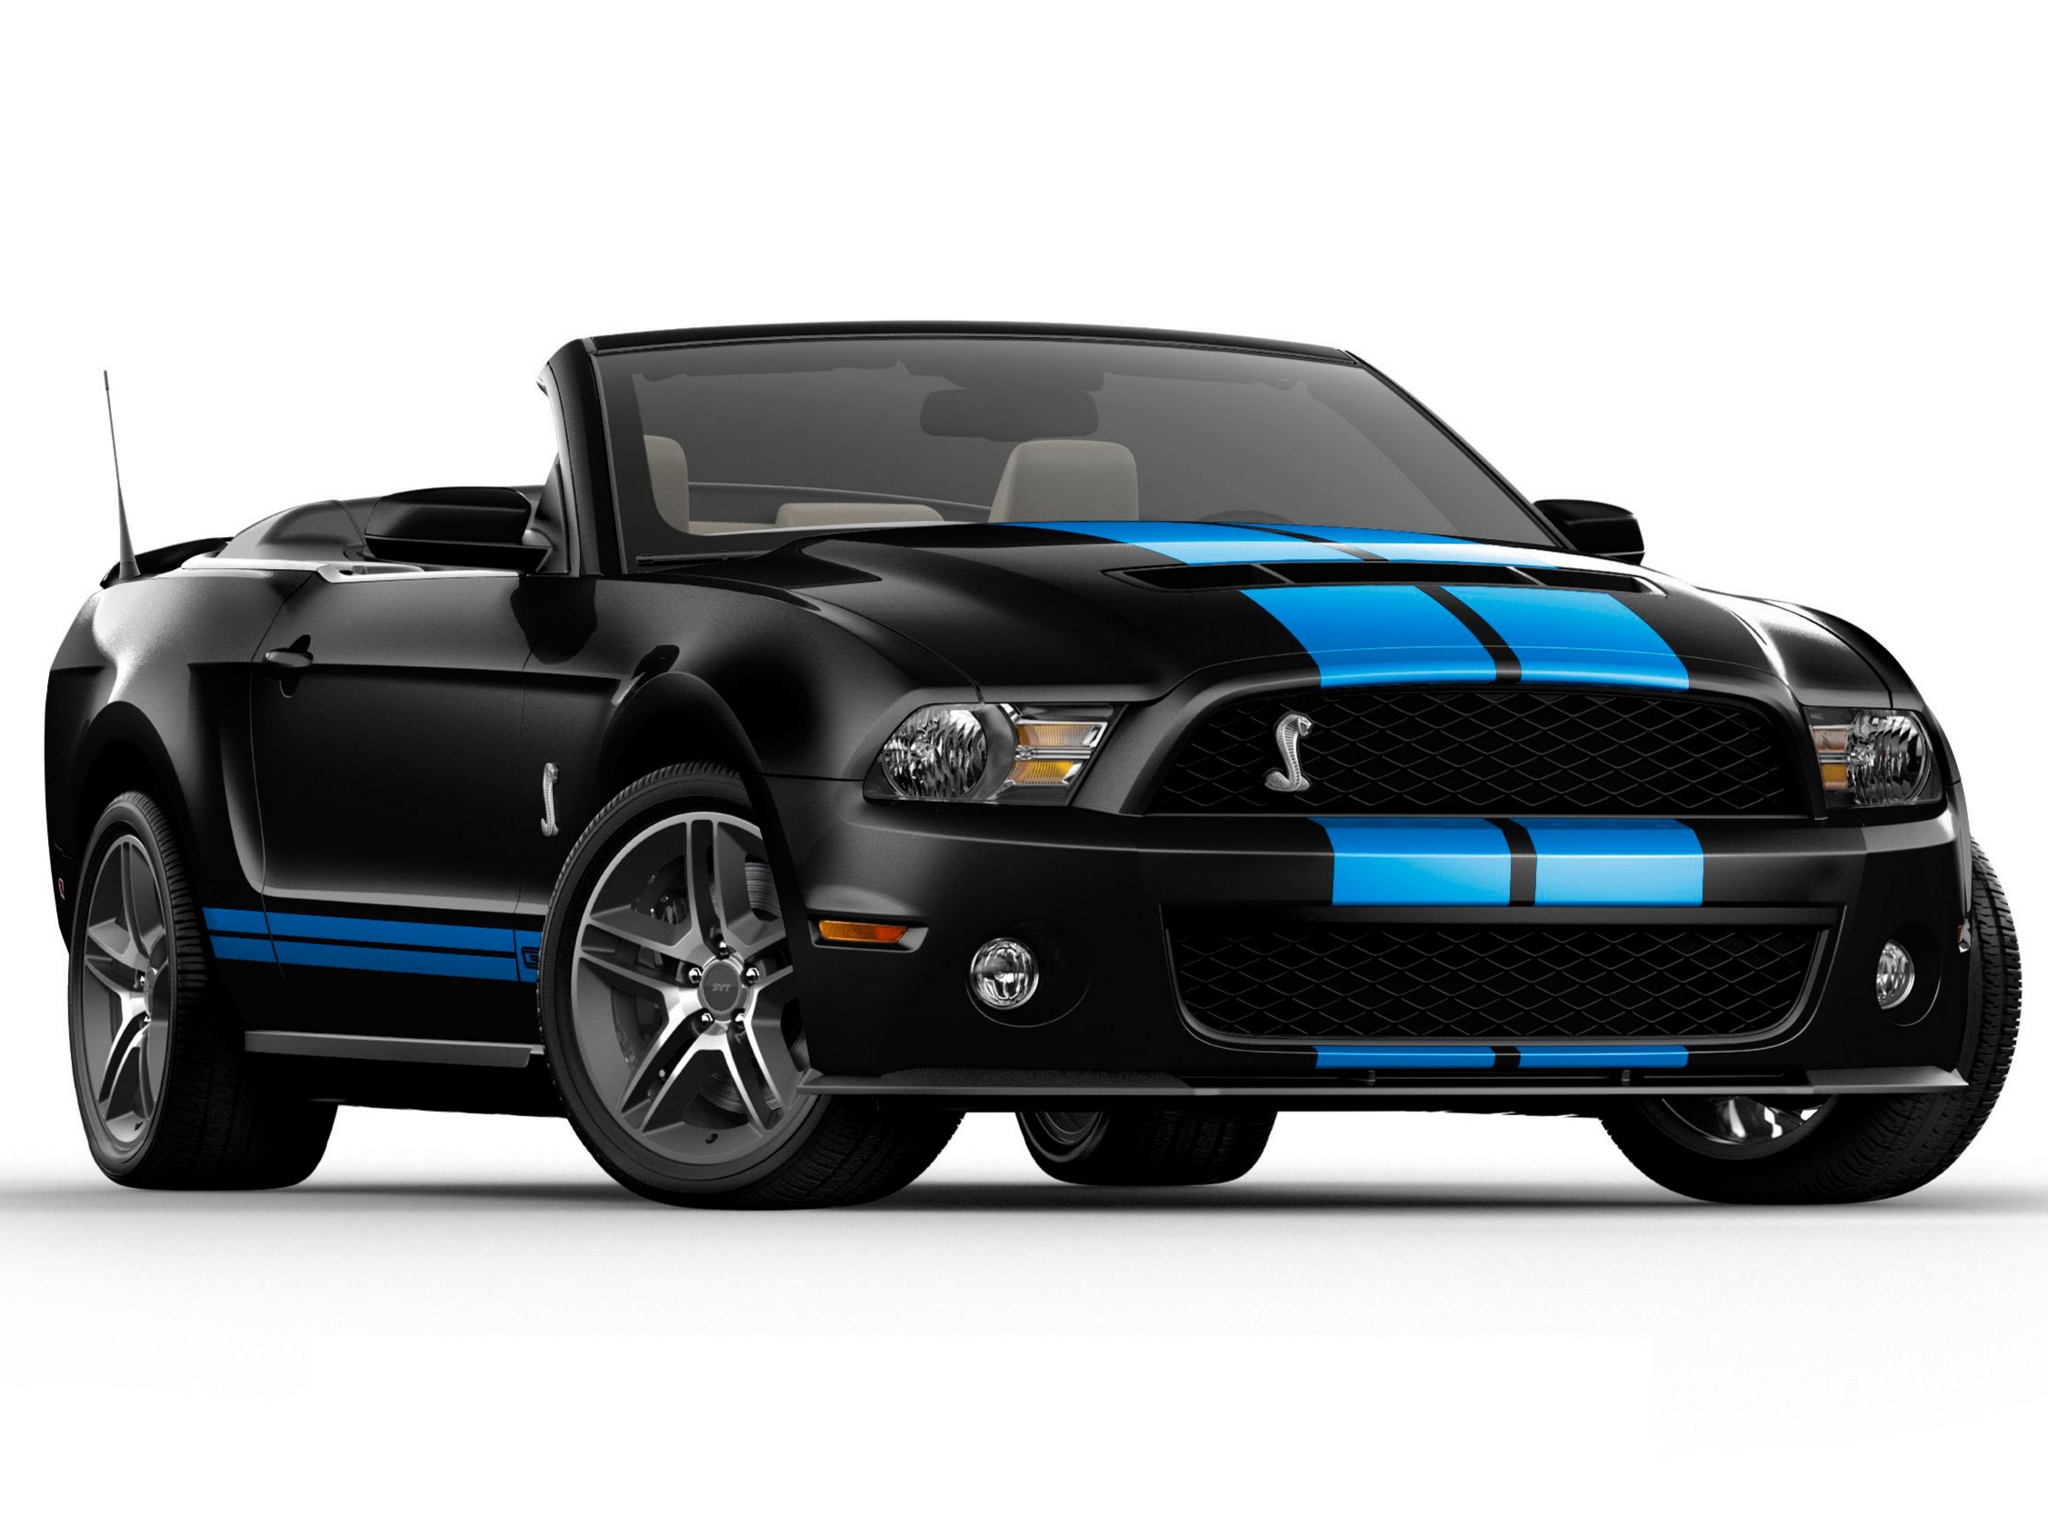 2009, Shelby, Gt500, Convertible, Svt, Ford, Mustang, Muscle Wallpaper